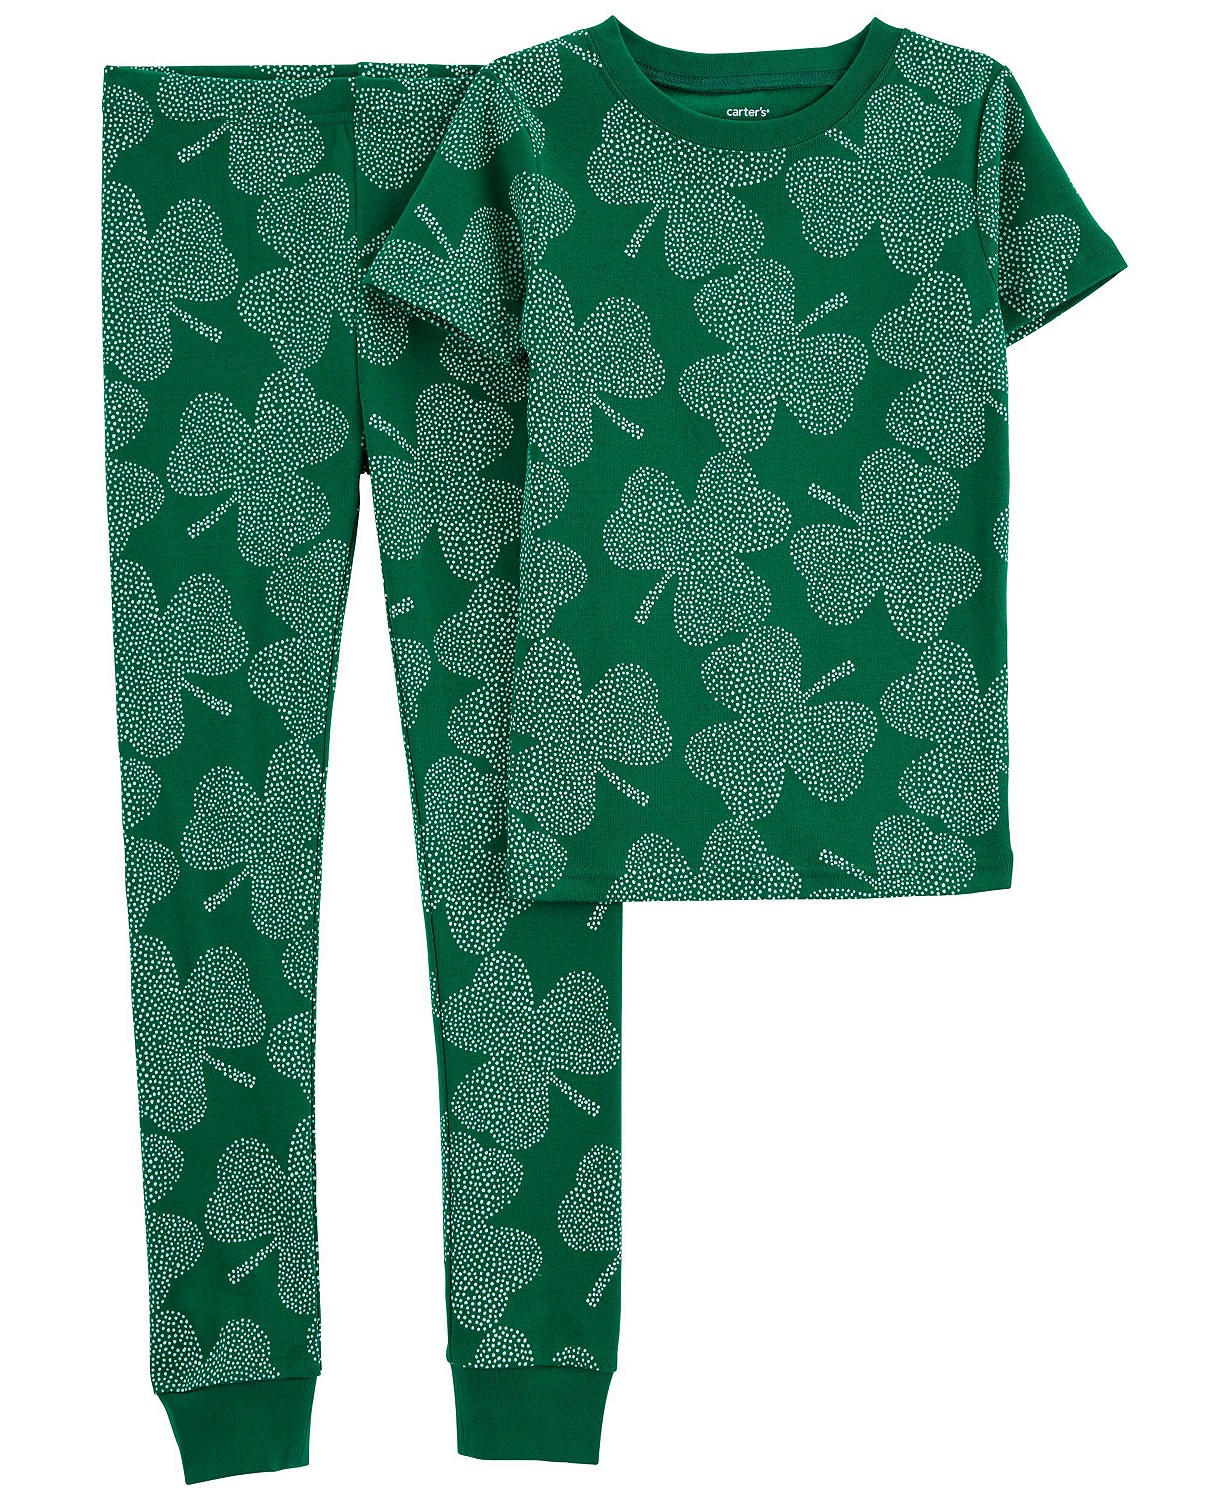 Little Boys and Girls St. Patricks Day Top and Snug Fit Pajamas, 2 Piece Set